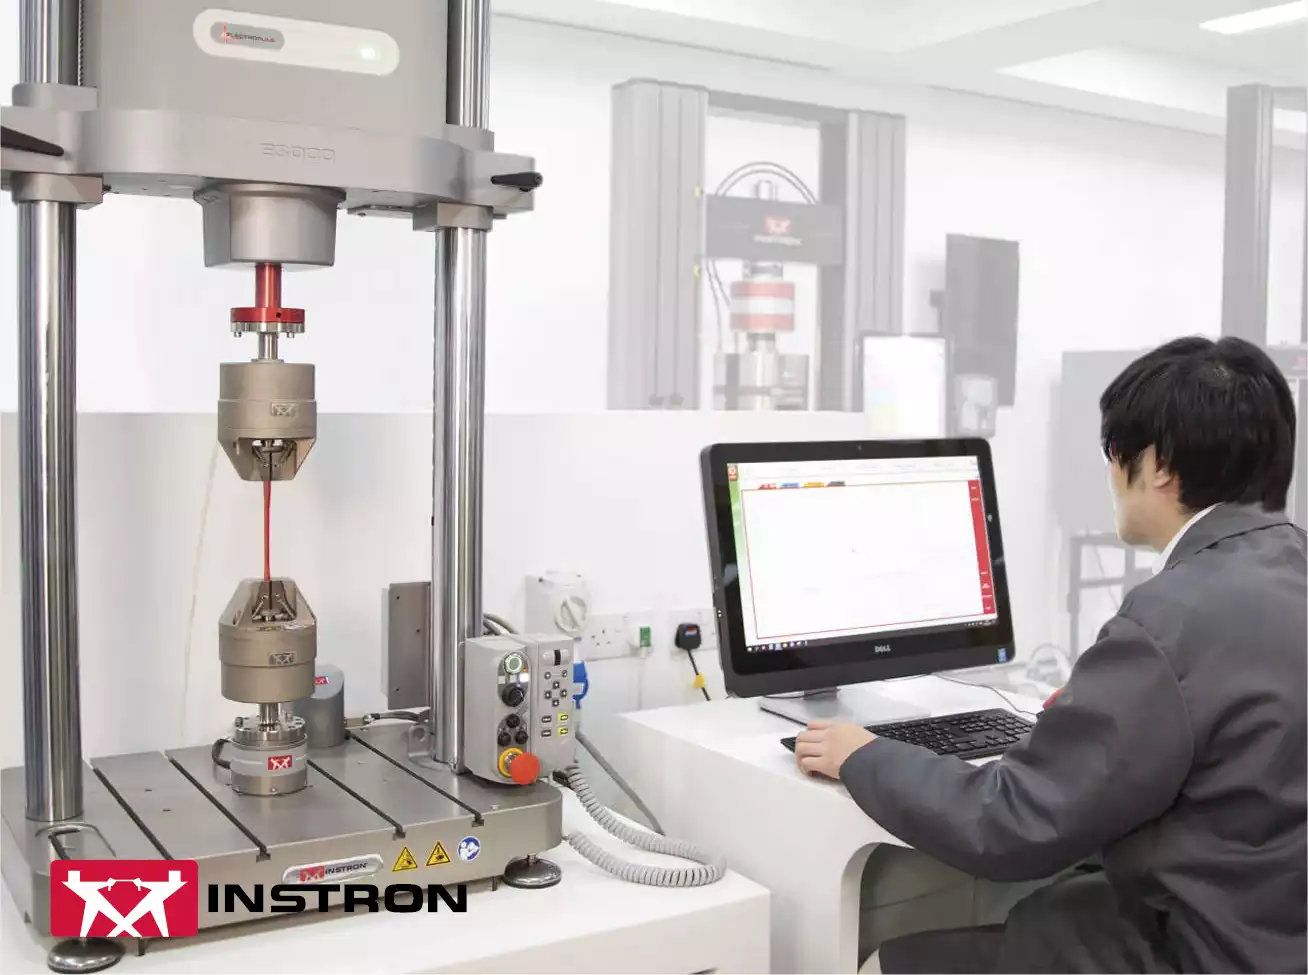 Instron ElectroPuls All-Electric Dynamic and Fatigue Test Systems